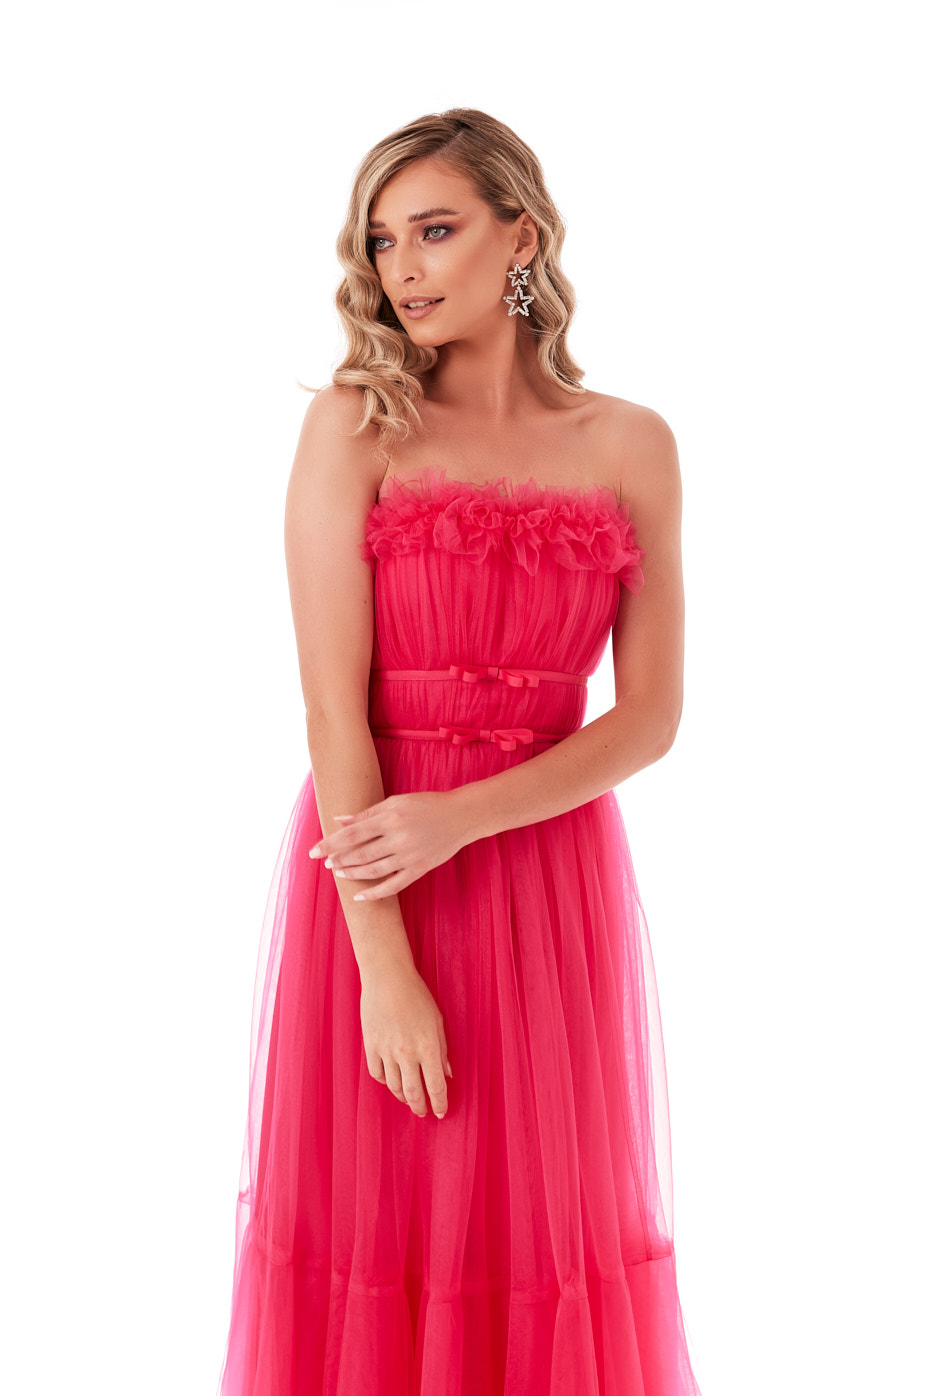 Rochie tip corset din tulle